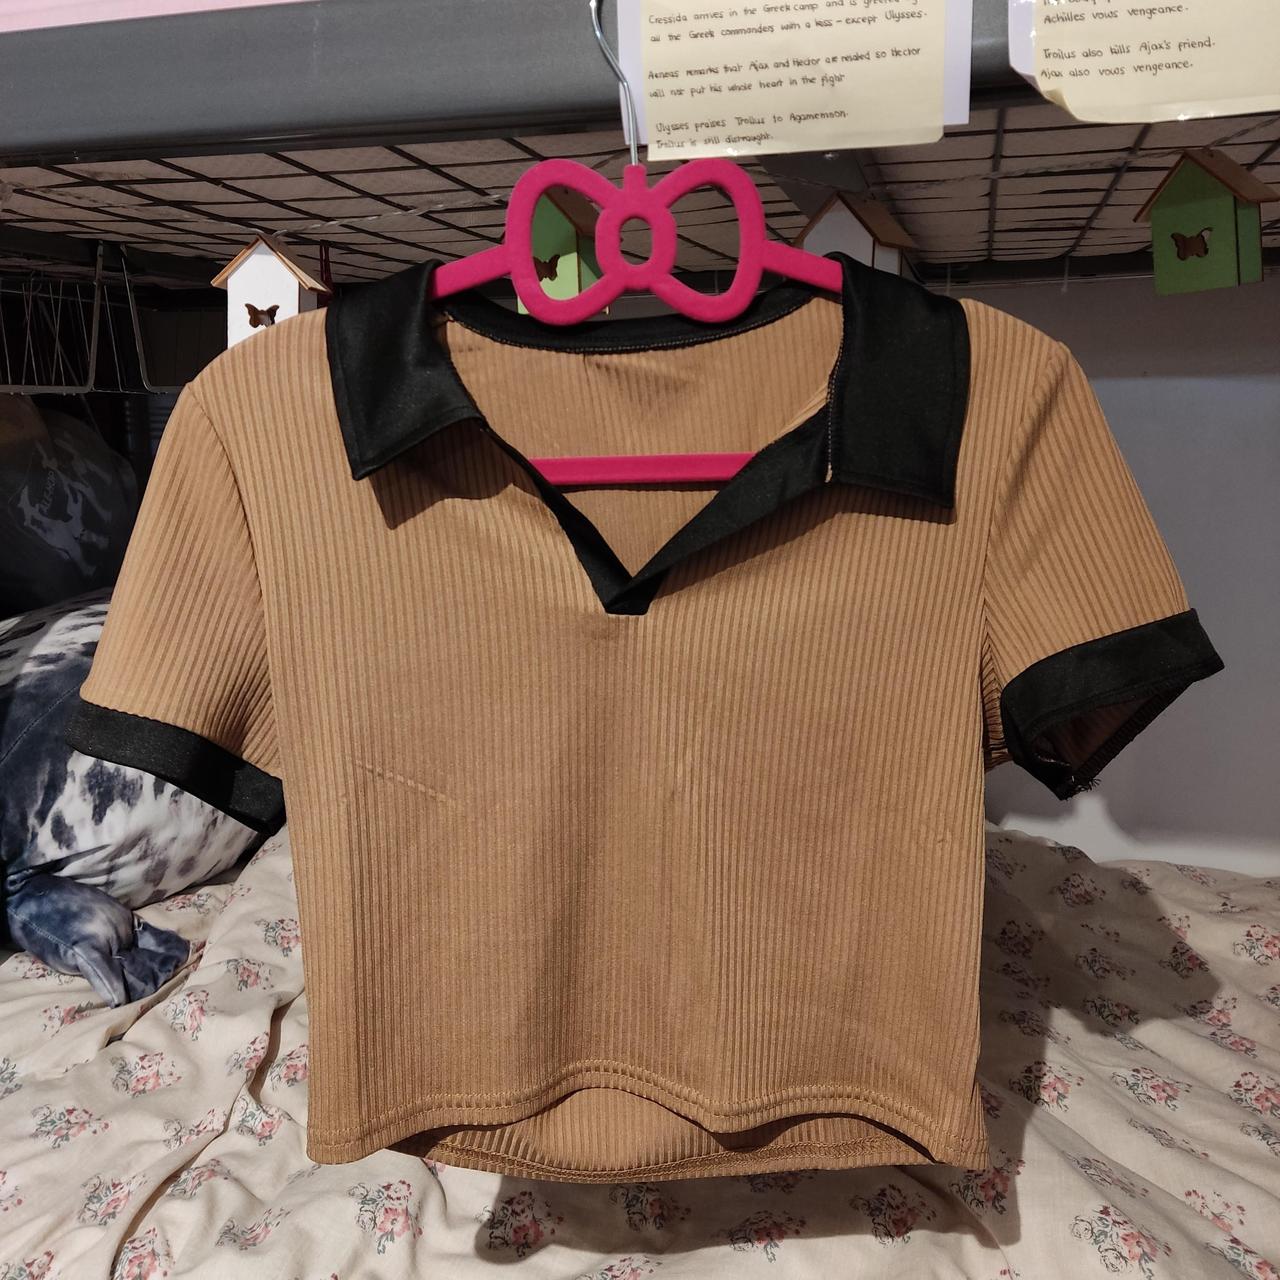 Product Image 1 - Brown ribbed collar t-shirt

-Never worn,